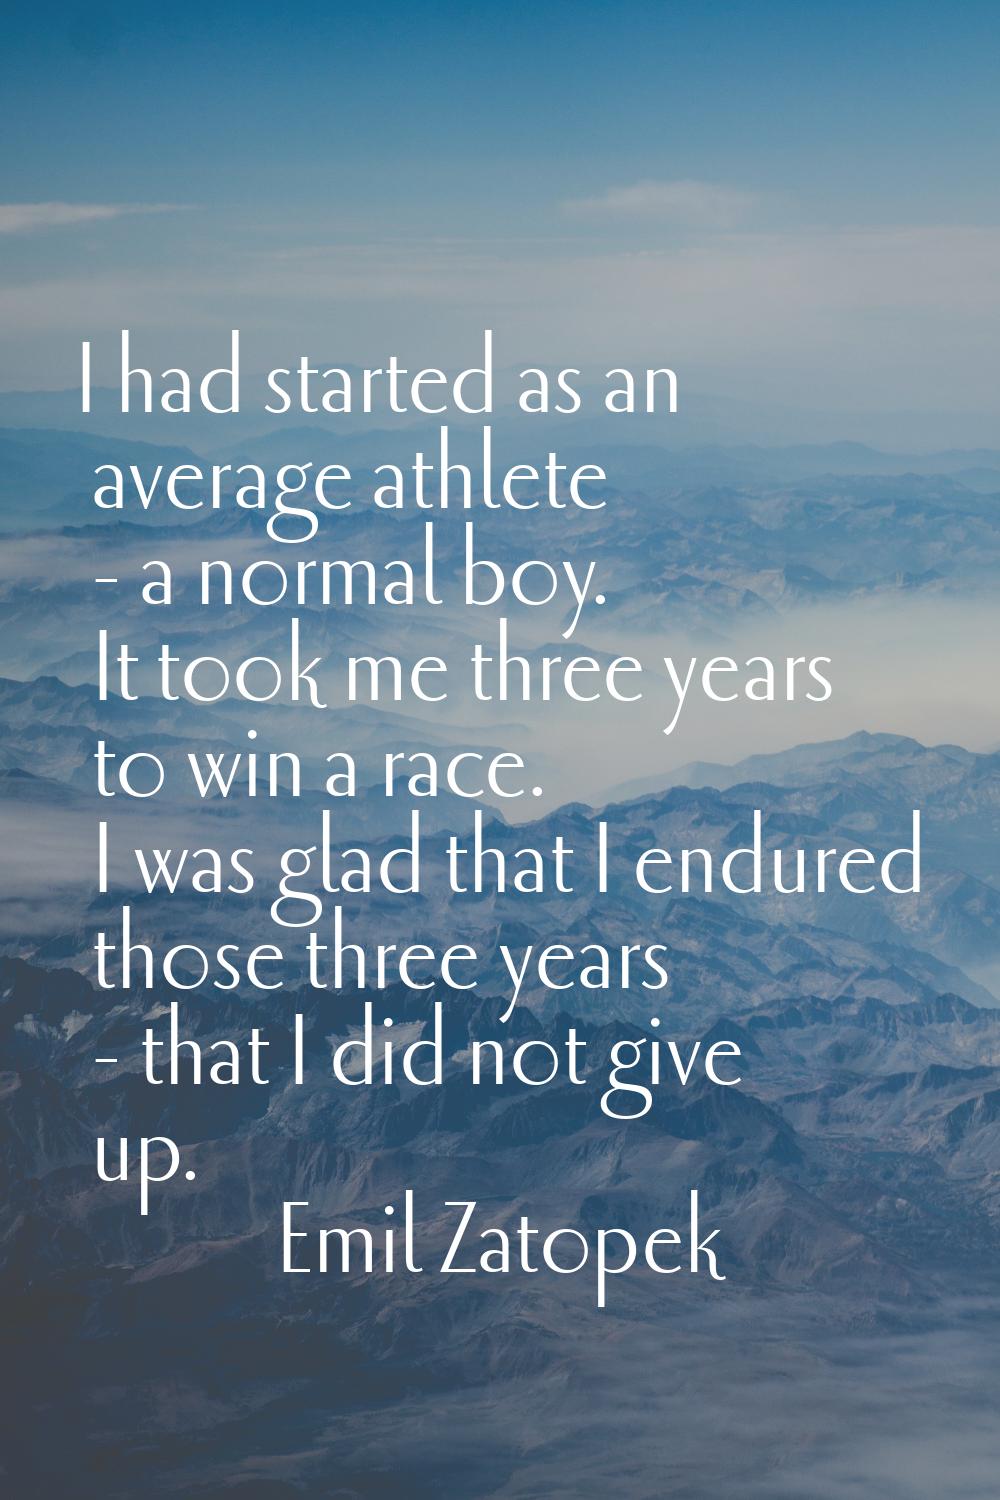 I had started as an average athlete - a normal boy. It took me three years to win a race. I was gla